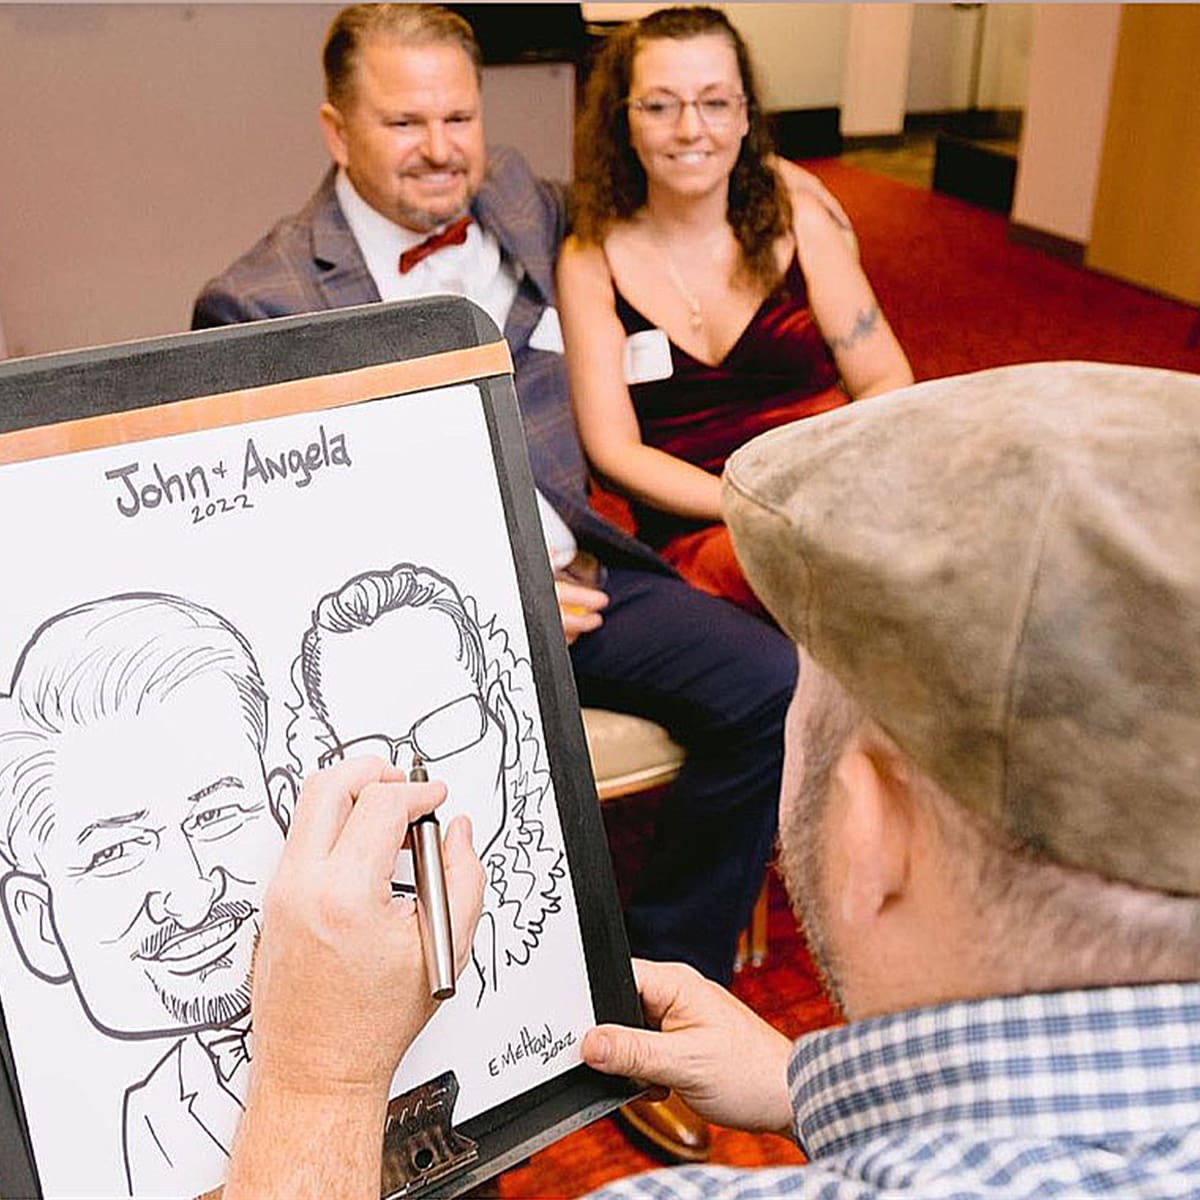 Party event Caricature Artist, Charlotte, NC.